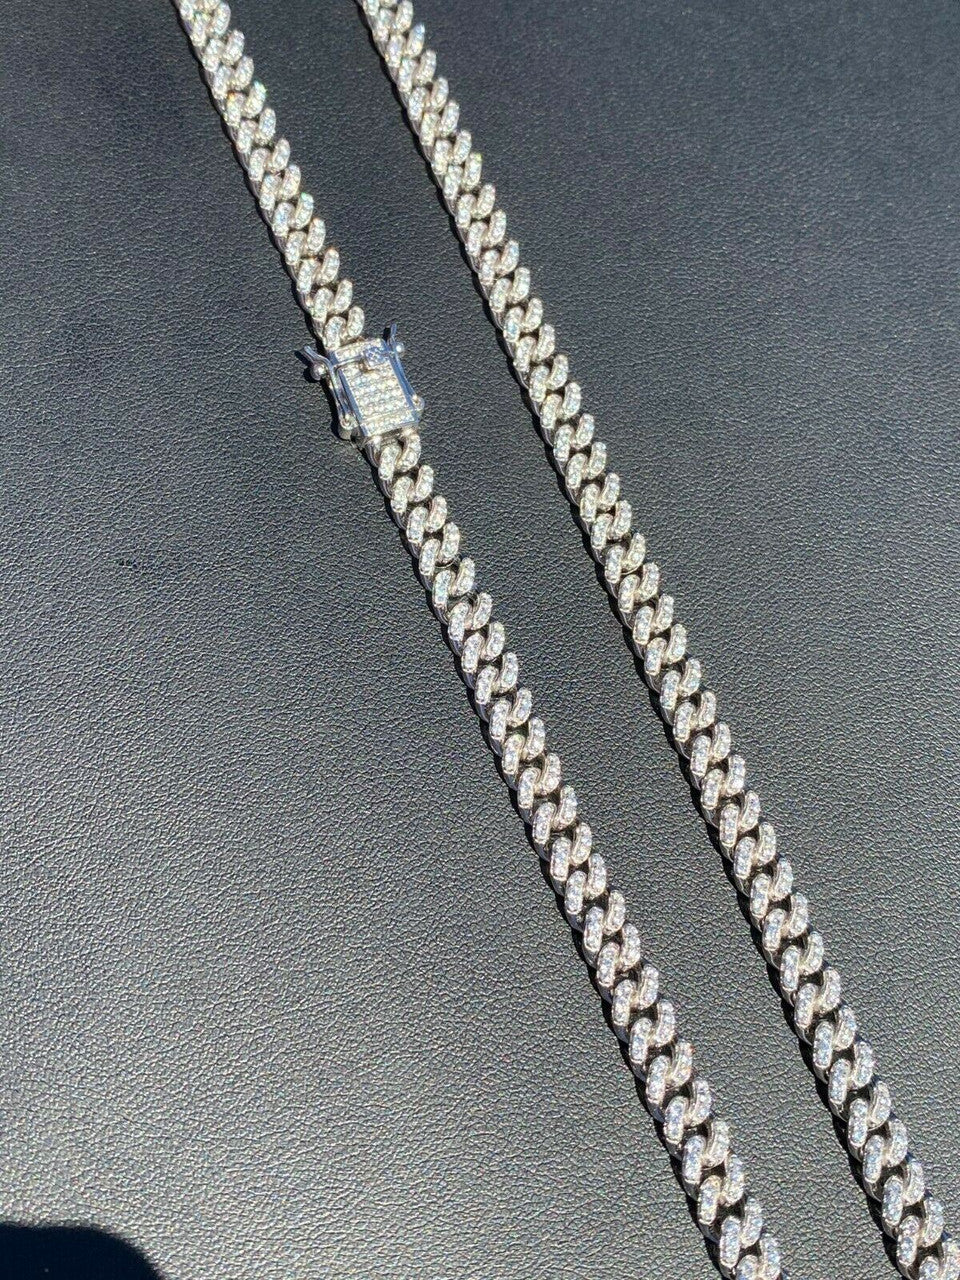 6mm Curb Cuban Iced 925 Silver Chain Necklace 16"- 30" MOISSANITE